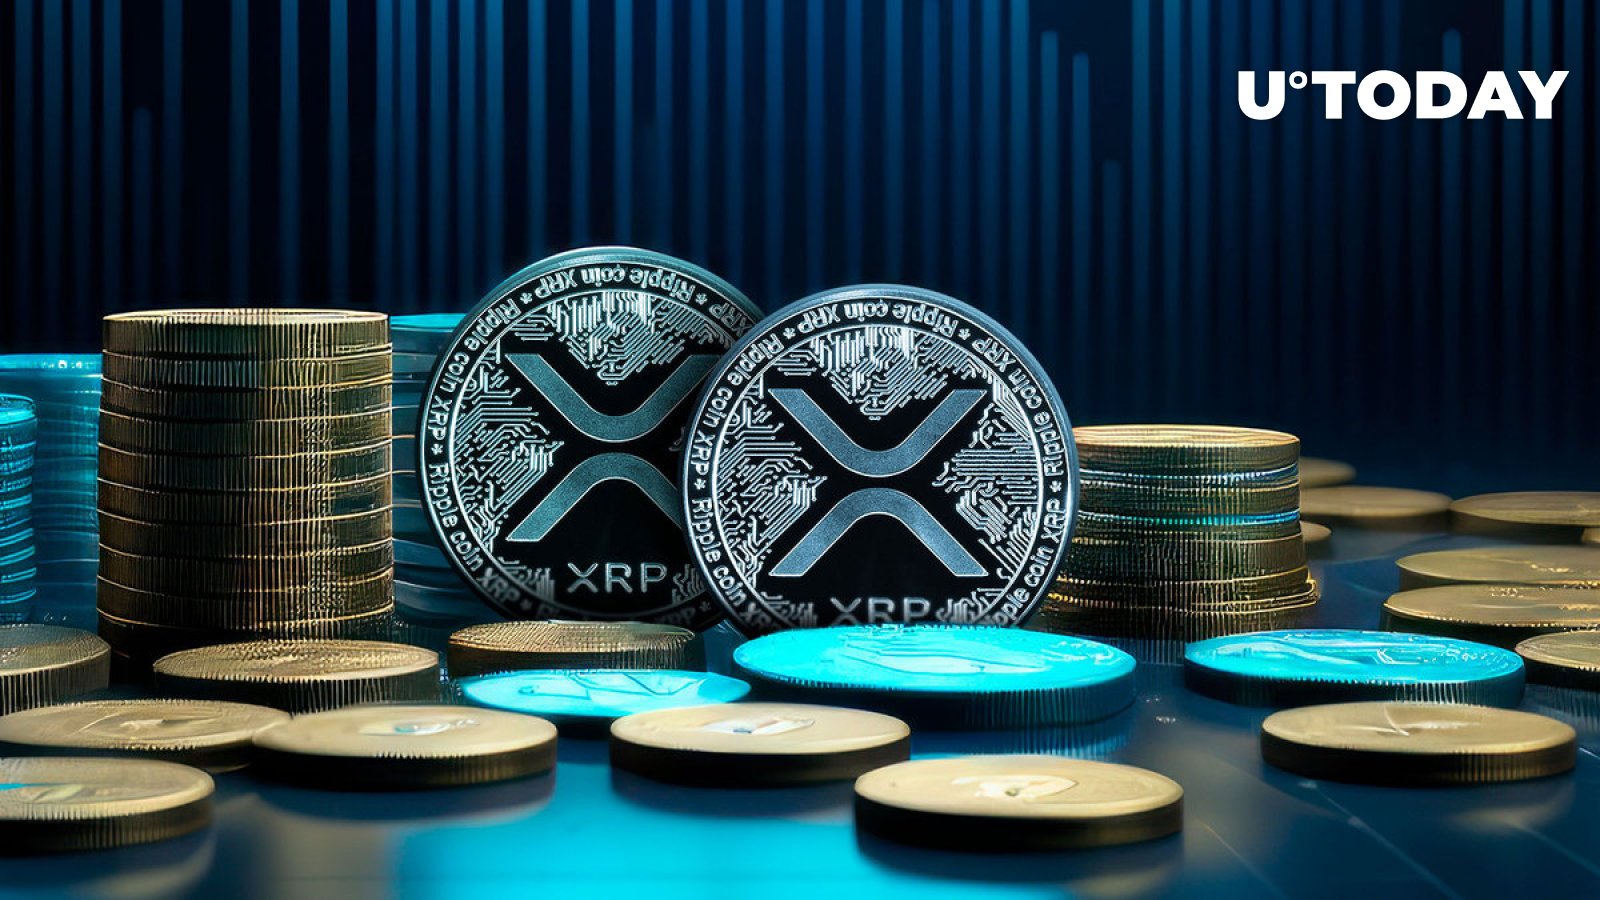 Abnormal XRP Transfers Continue, With Mysterious 443 Million XRP Move